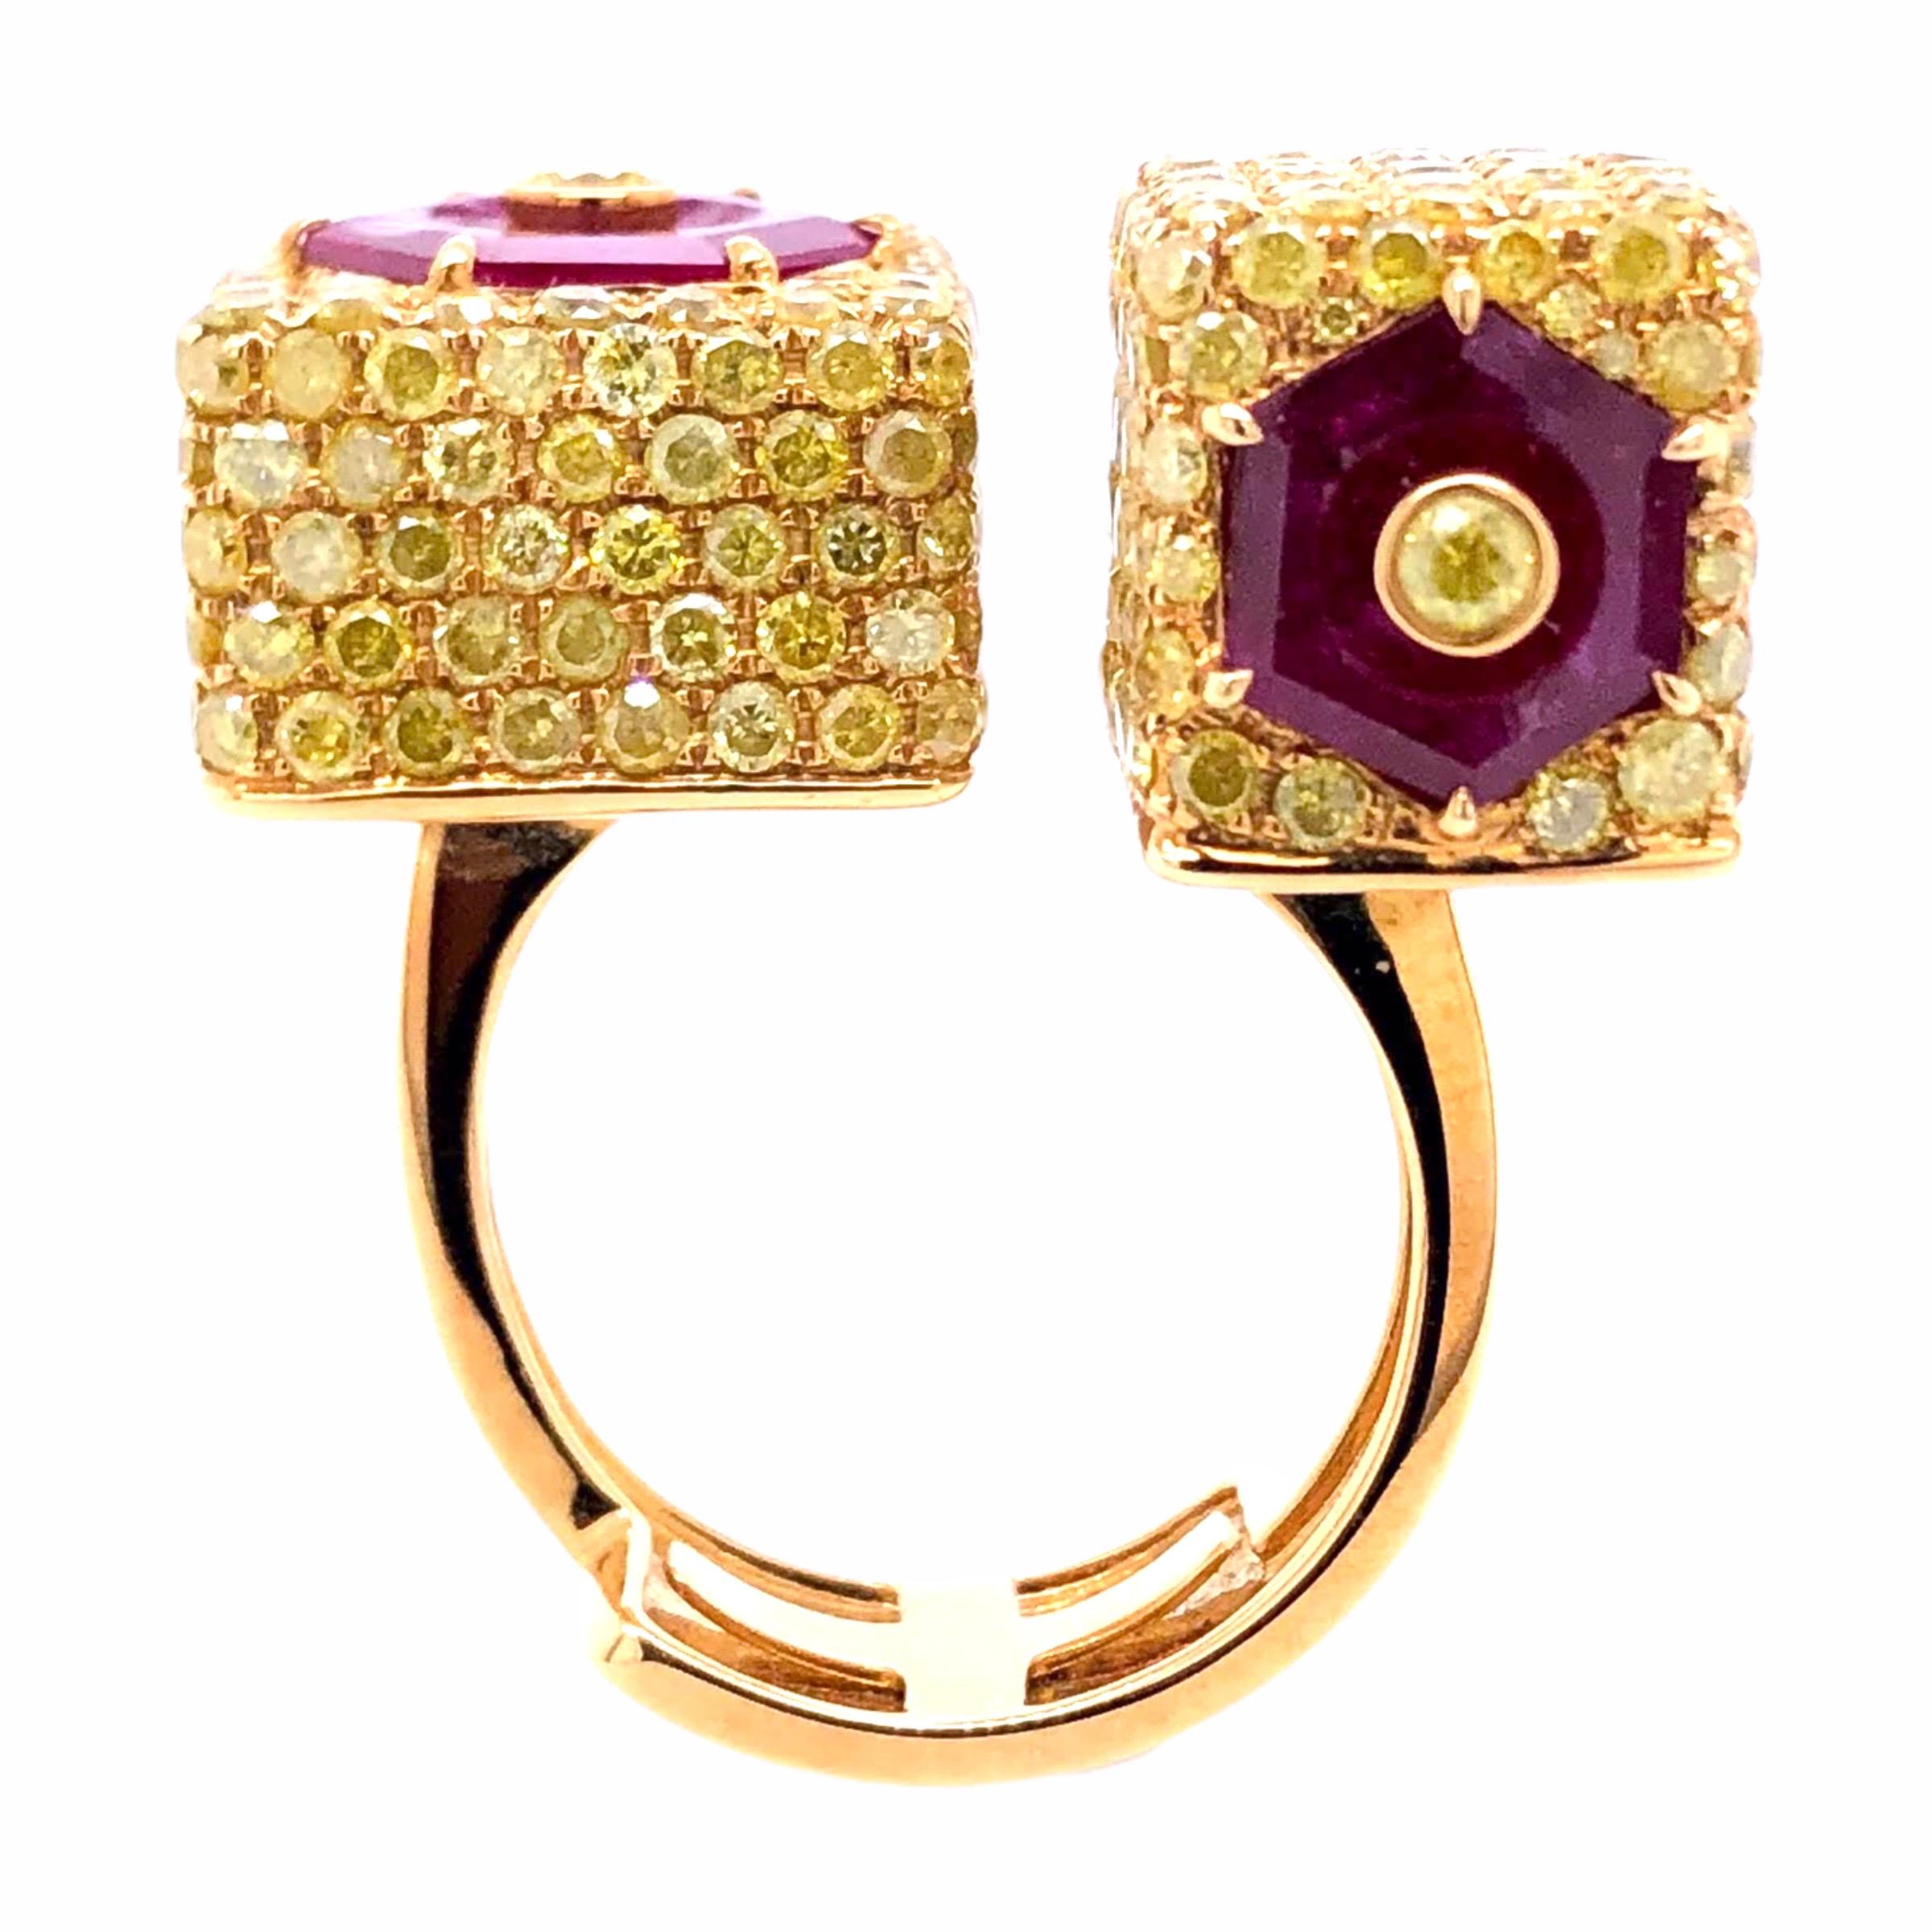 PARIS Craft House Ruby Yellow Diamond Ring in 18 Karat Yellow Gold.

- 2 Fancy-cut Rubies/3.9ct
- 307 Yellow Diamonds/6.37ct
- 18K Yellow Gold

Designed and crafted at PARIS Craft House.